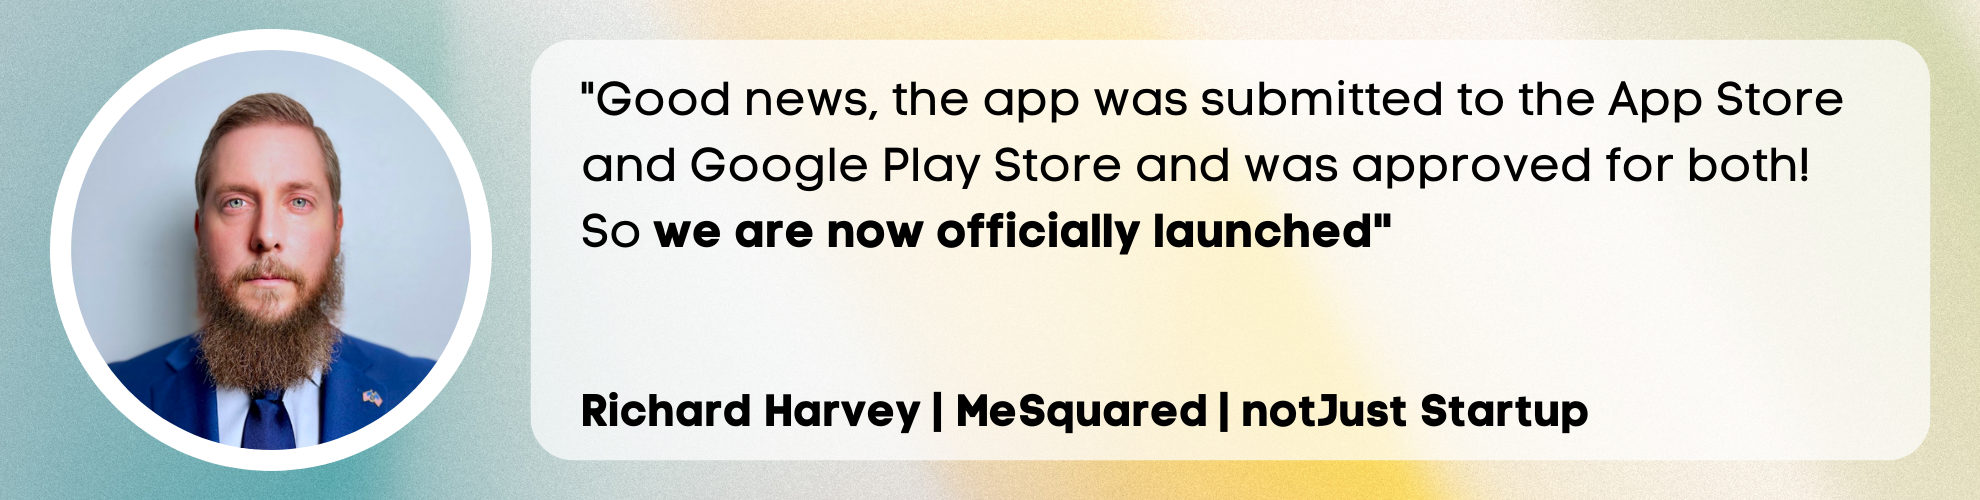 Good news, the app was submitted to the App Store and Google Play Store and was approved for both! So we are now officially launched